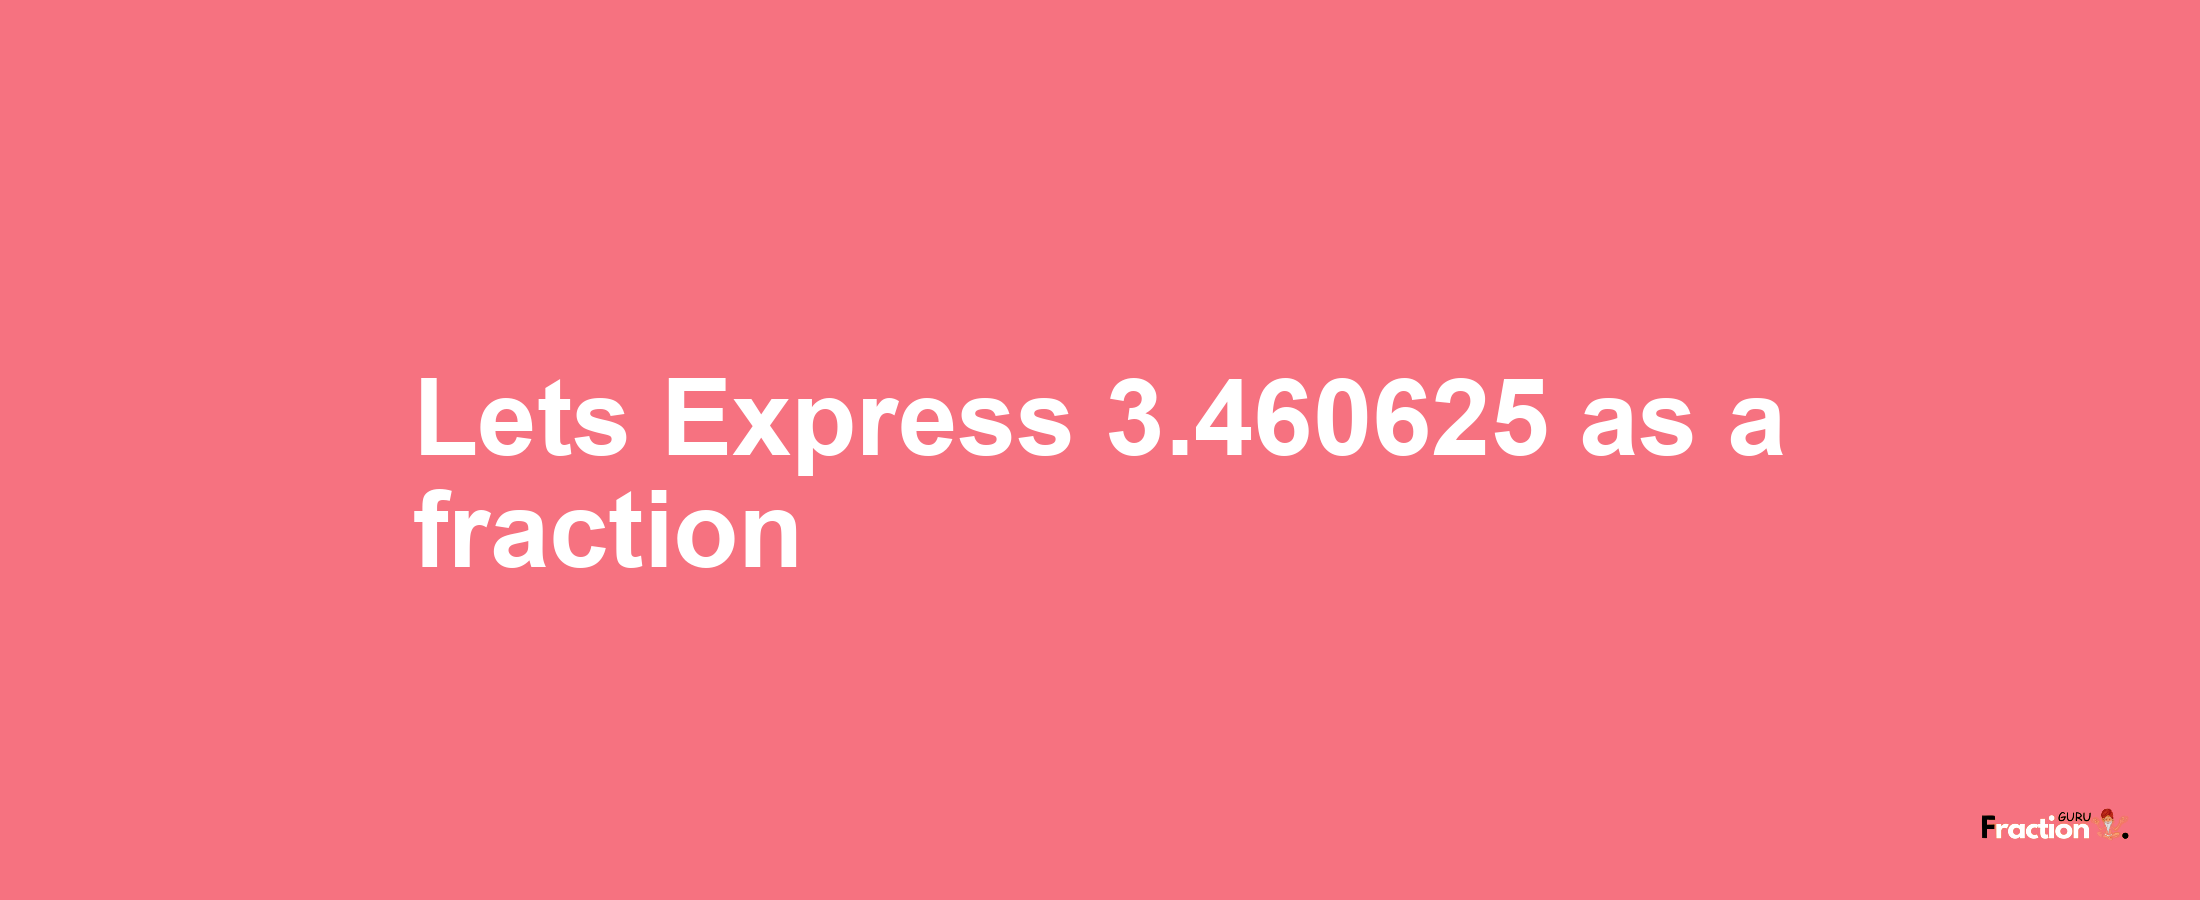 Lets Express 3.460625 as afraction